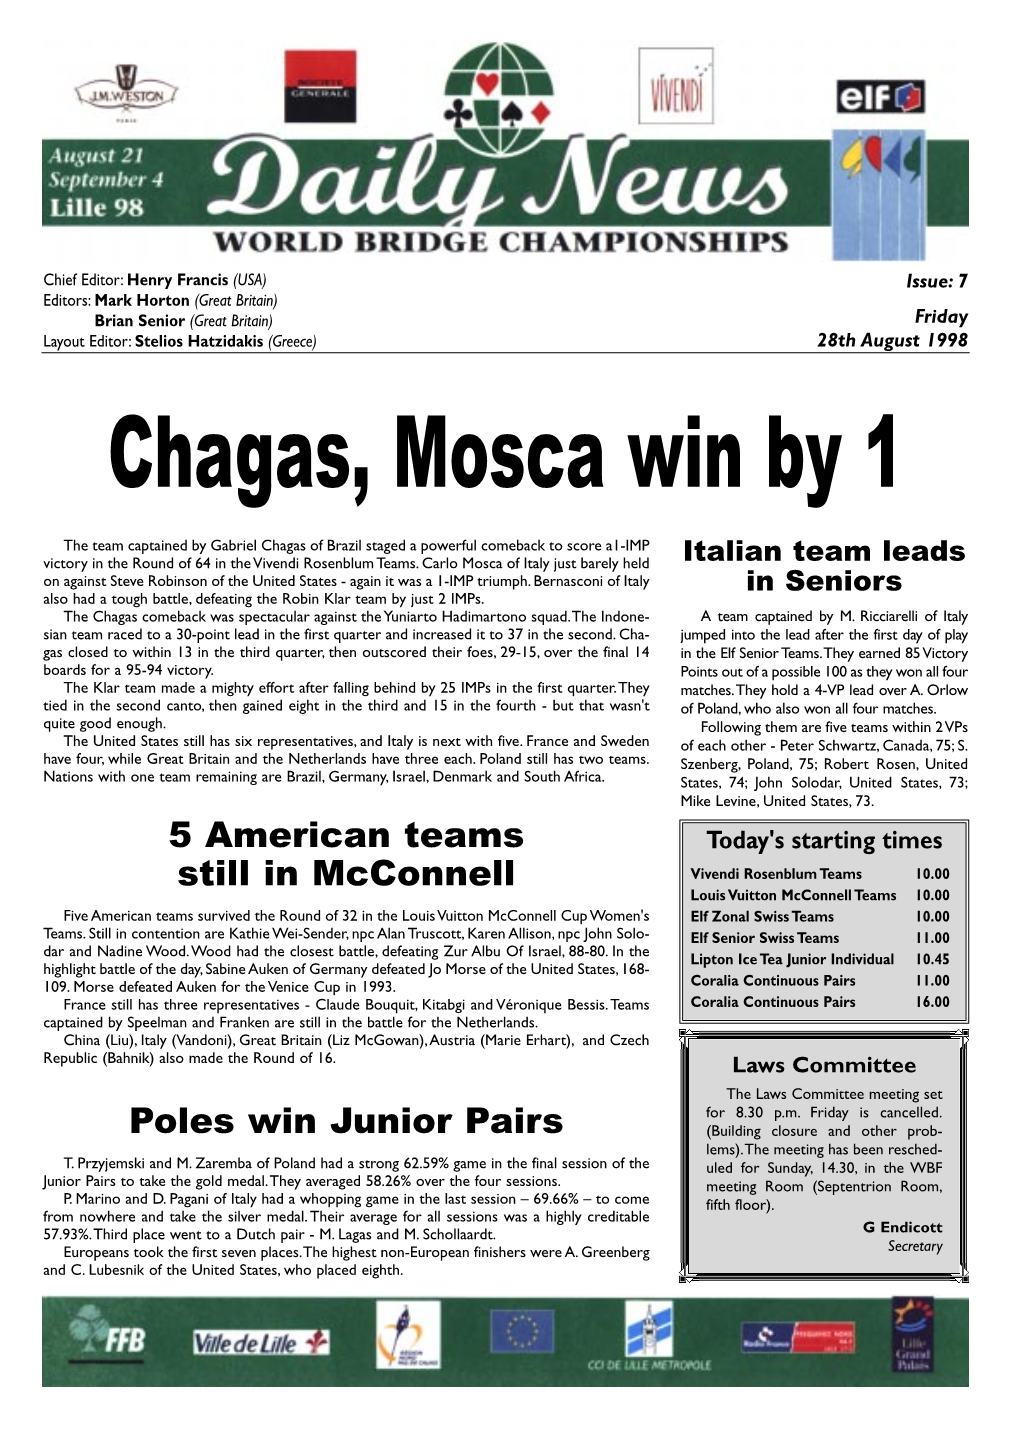 Chagas, Mosca Win by 1